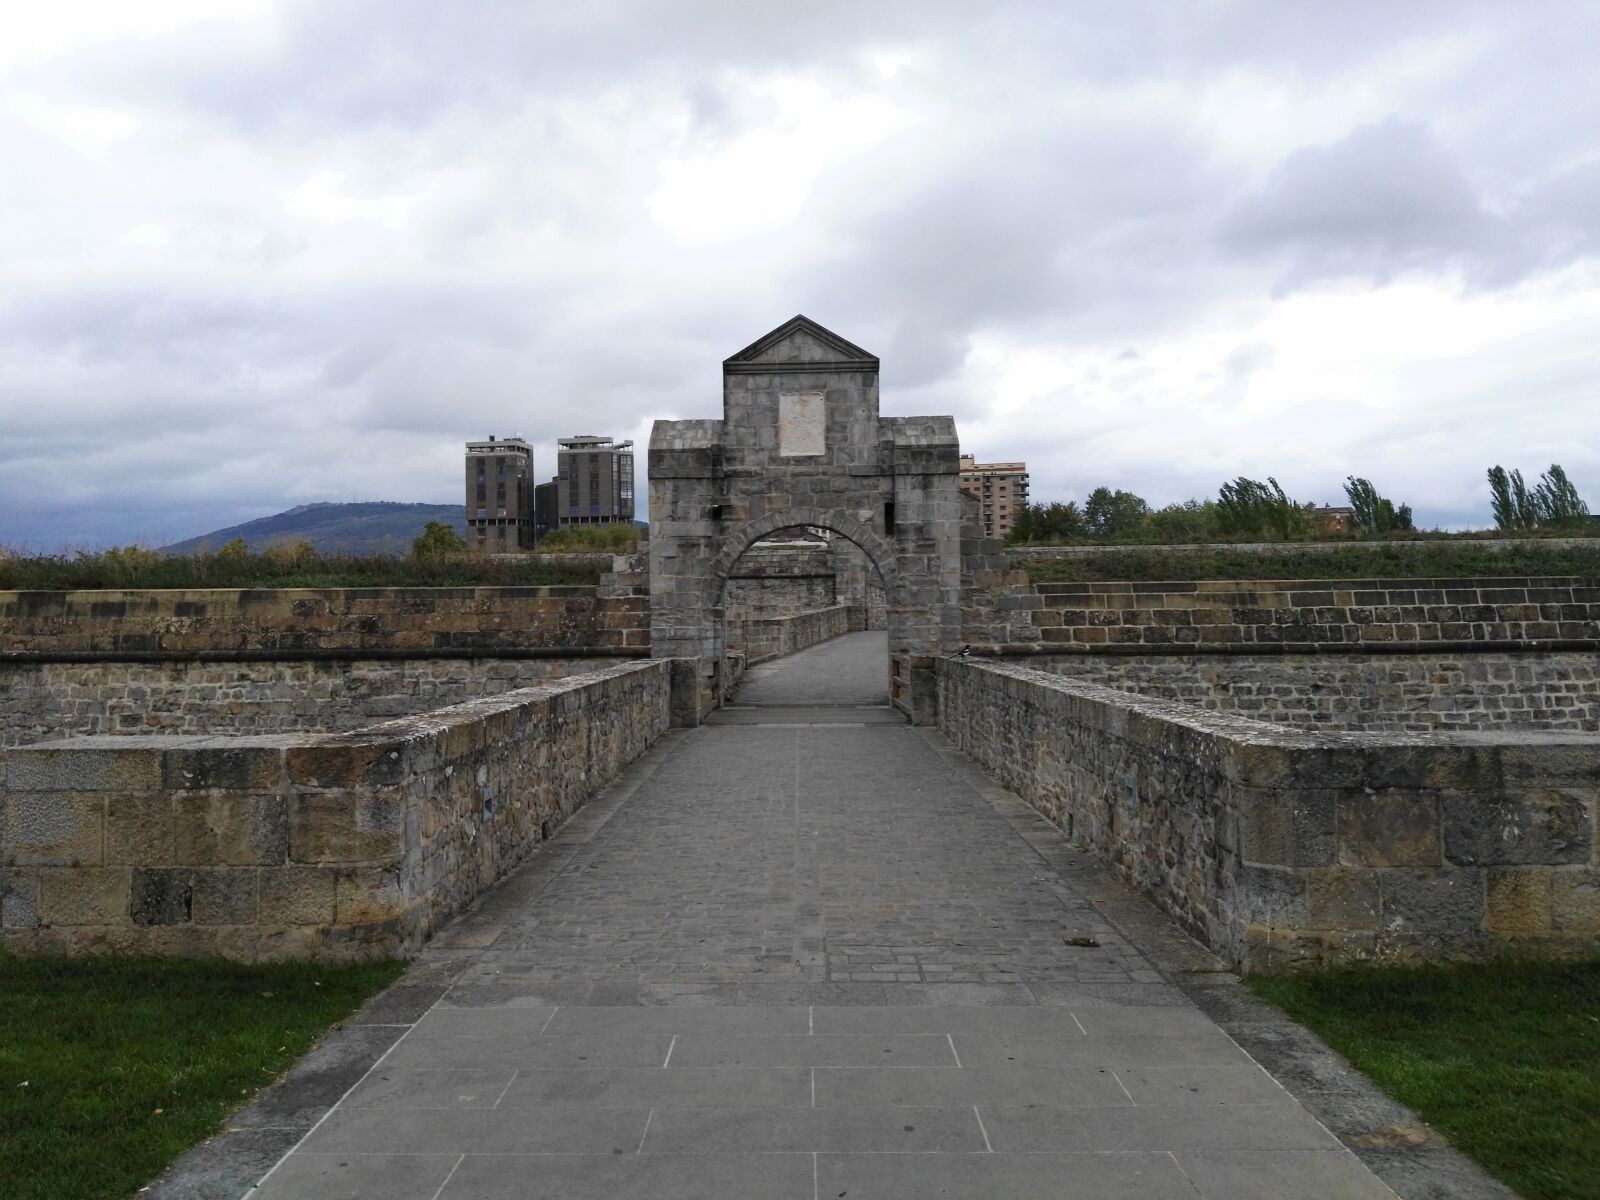 HUAWEI GX8 sample photo. Fortress, stone, architecture photography